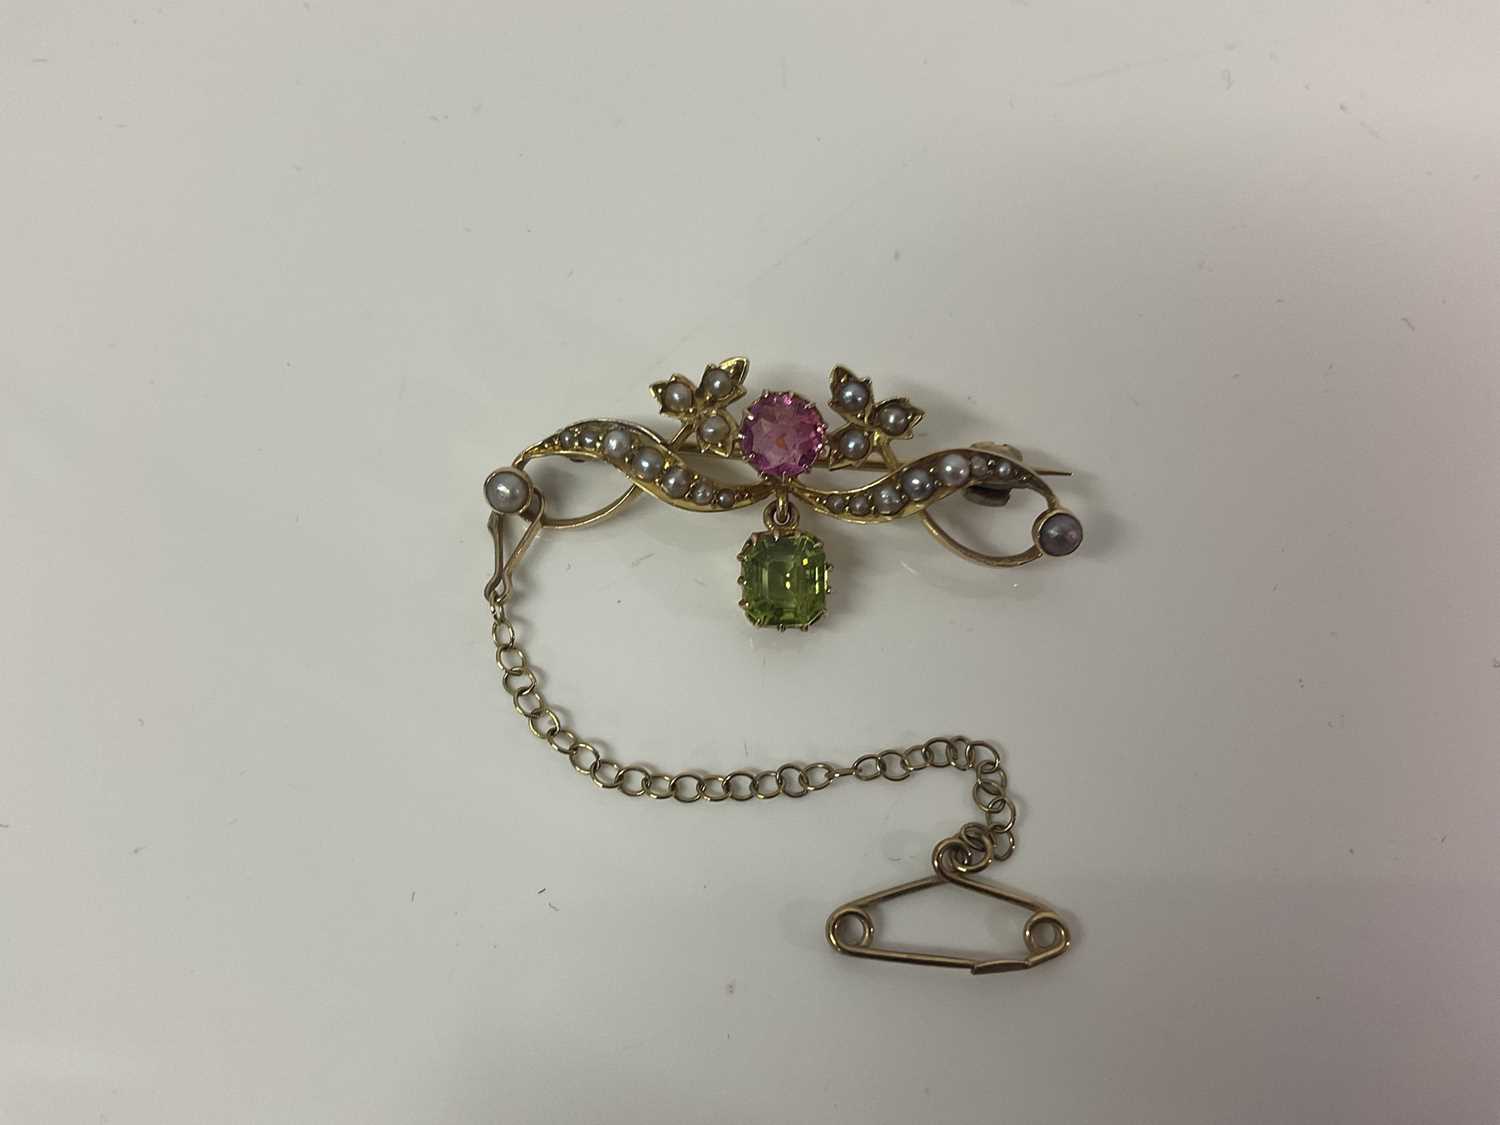 Edwardian pink tourmaline, peridot and seed pearl brooch in box - Image 5 of 6